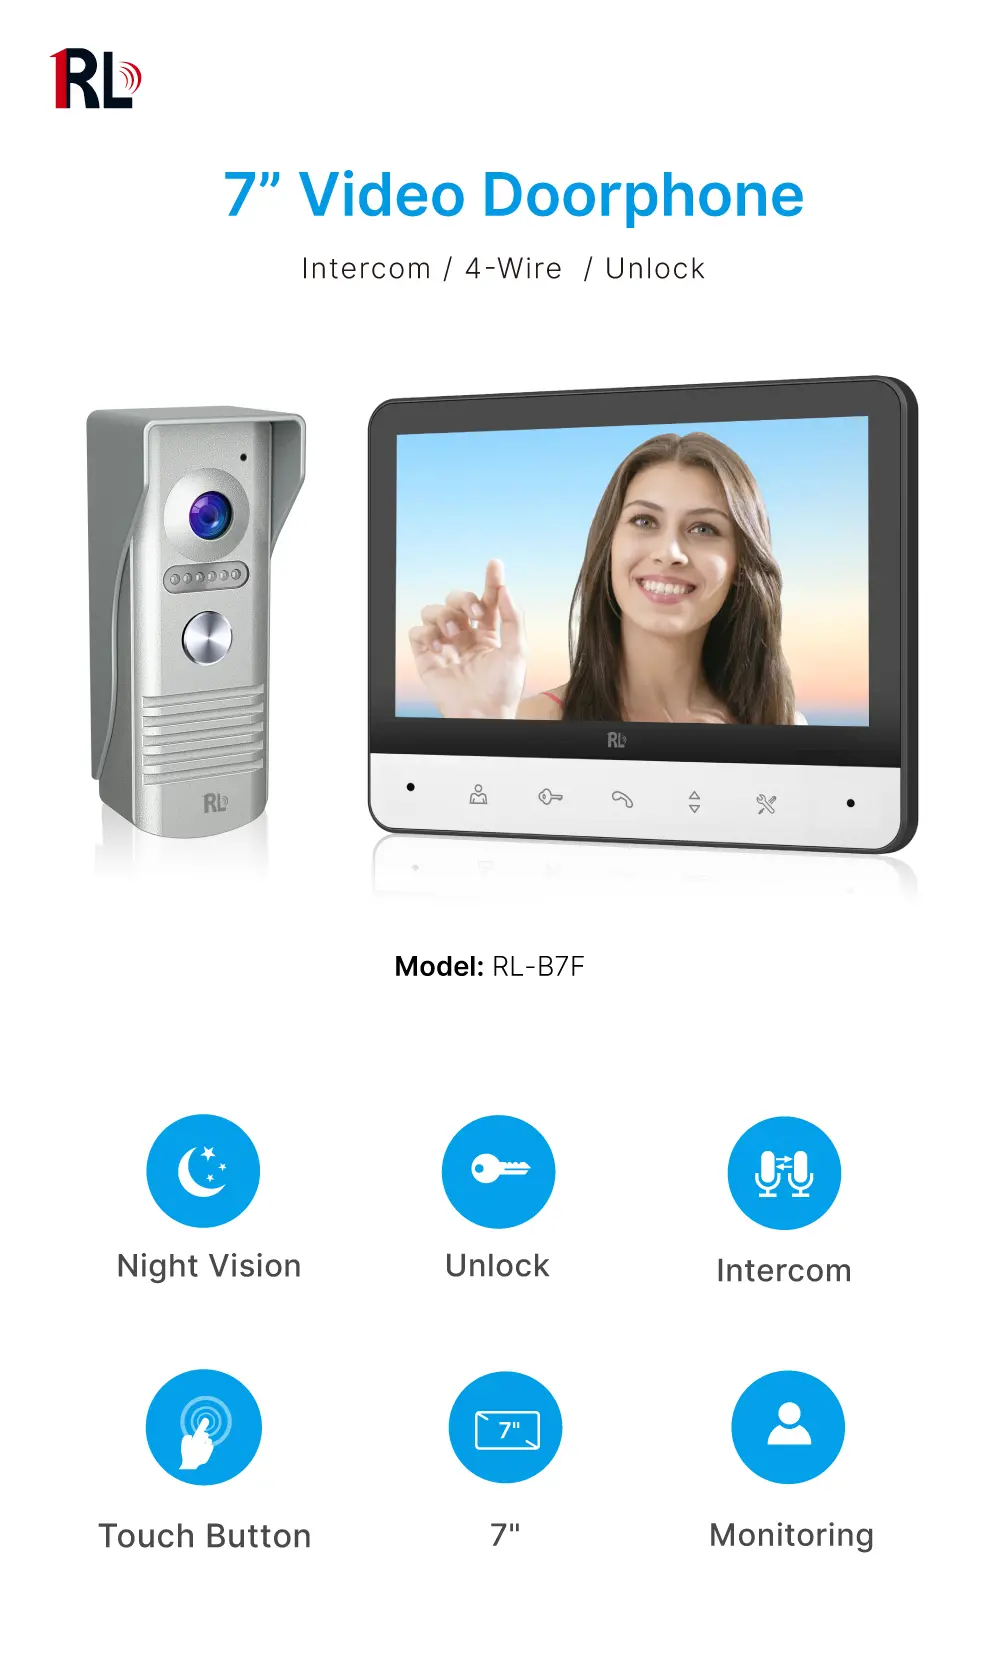 7inch Video Doorphone #RL-B7F- 7inch TFT screen with widescreen images and no radiation, low power consumption but high definition. Water-proof, oxidation-proof, _01